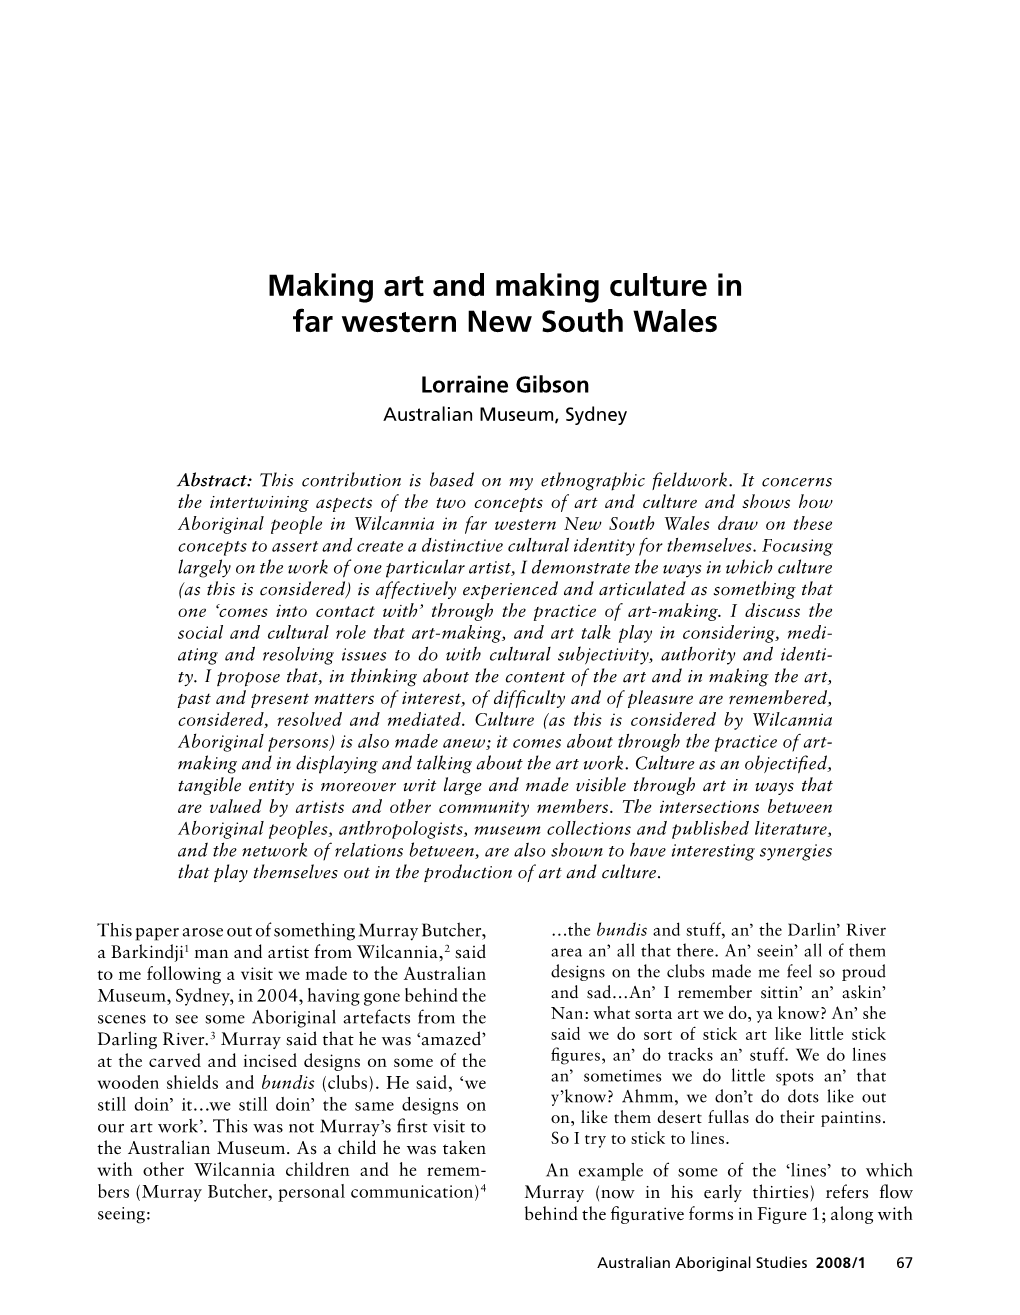 Making Art and Making Culture in Far Western New South Wales